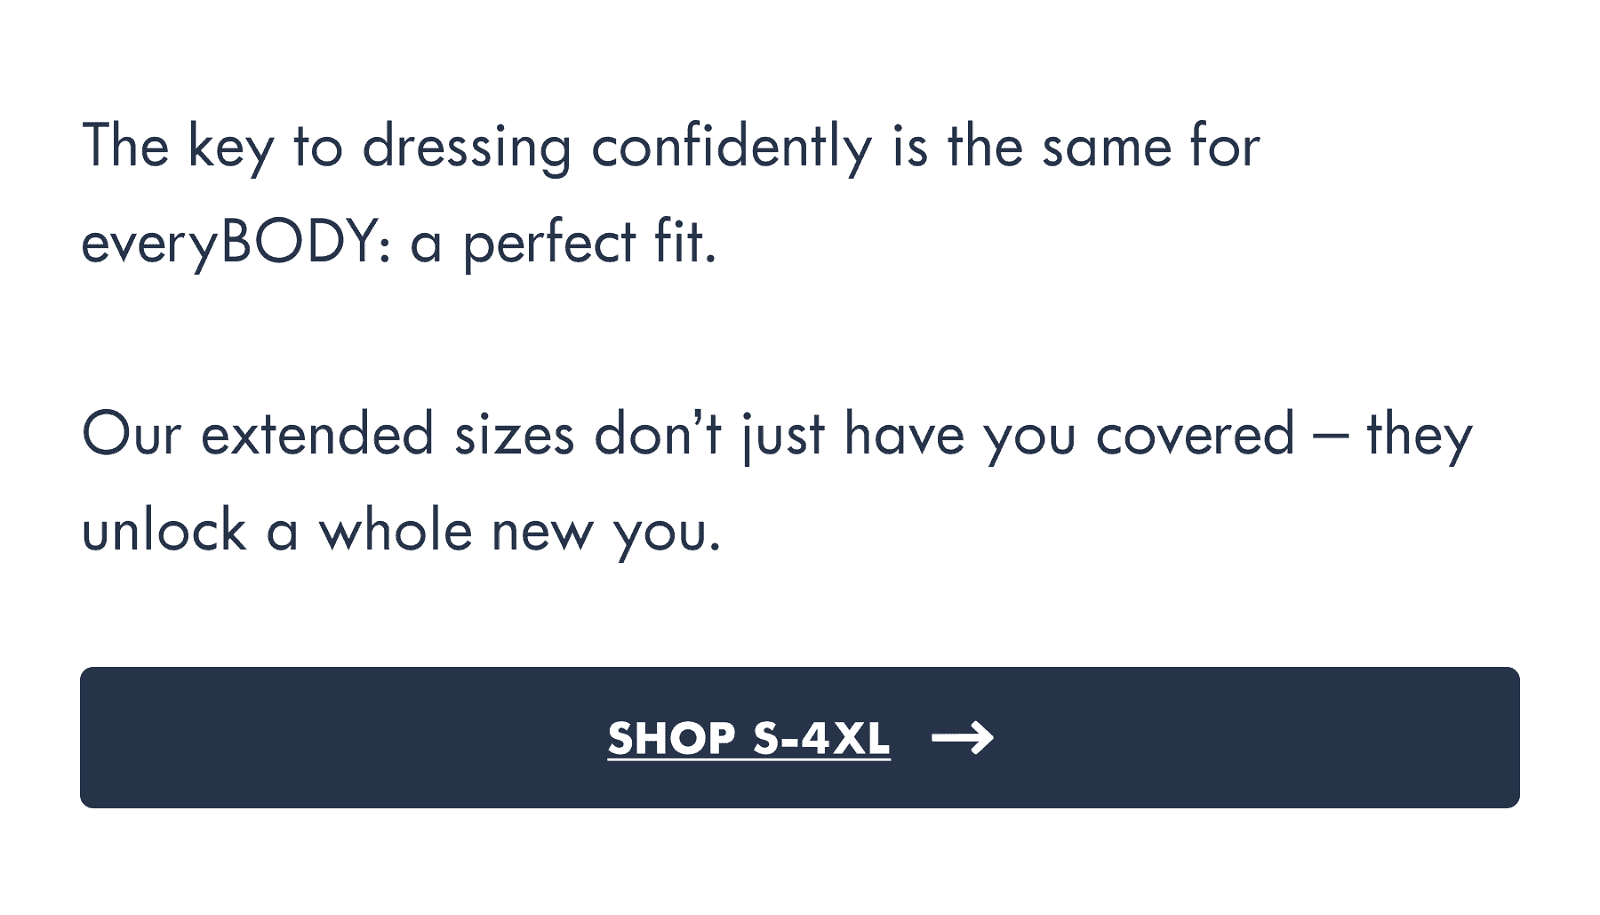 Our extended sizes don't just have you covered, they unlock a whole new you.